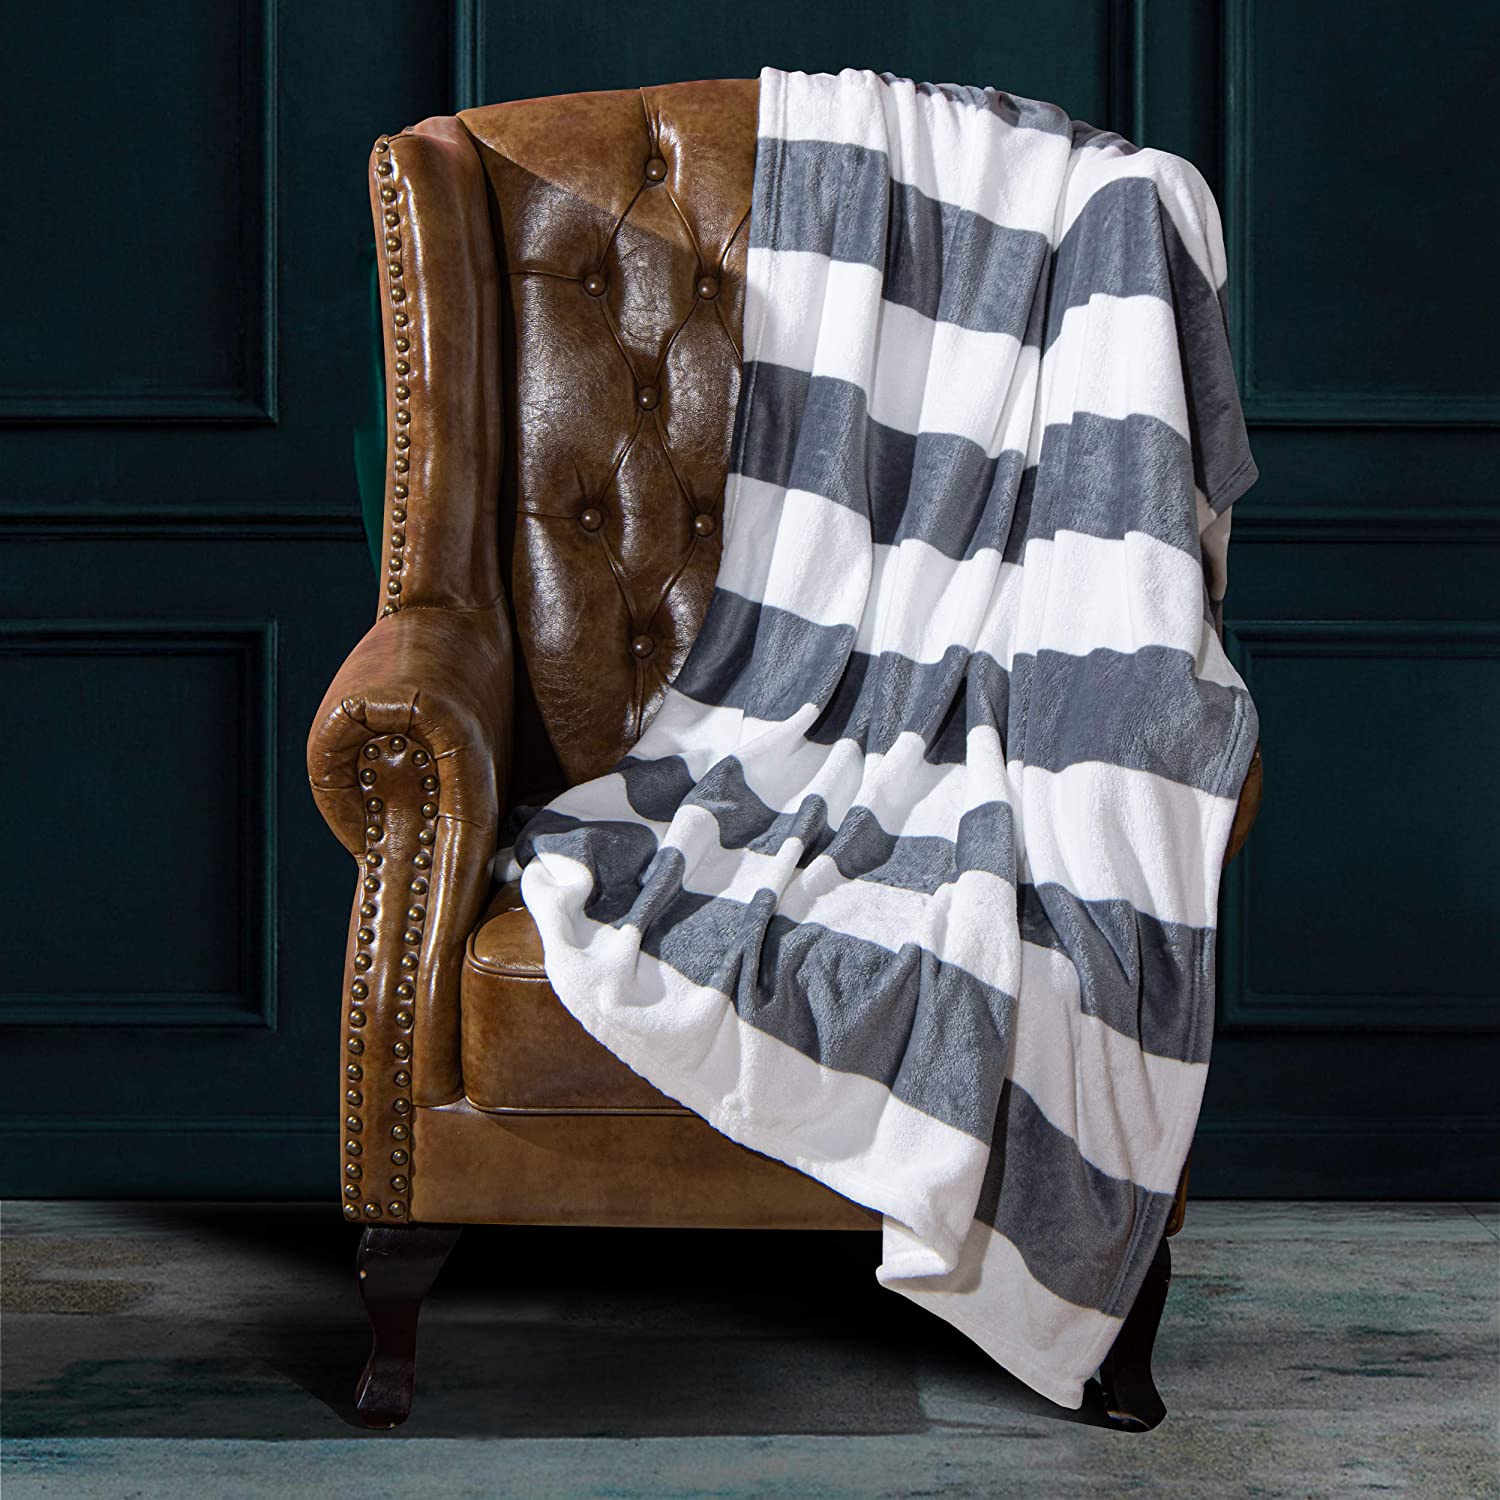 NTBAY Lightweight Wrinkle & Fade Resistant Blankets & Throws